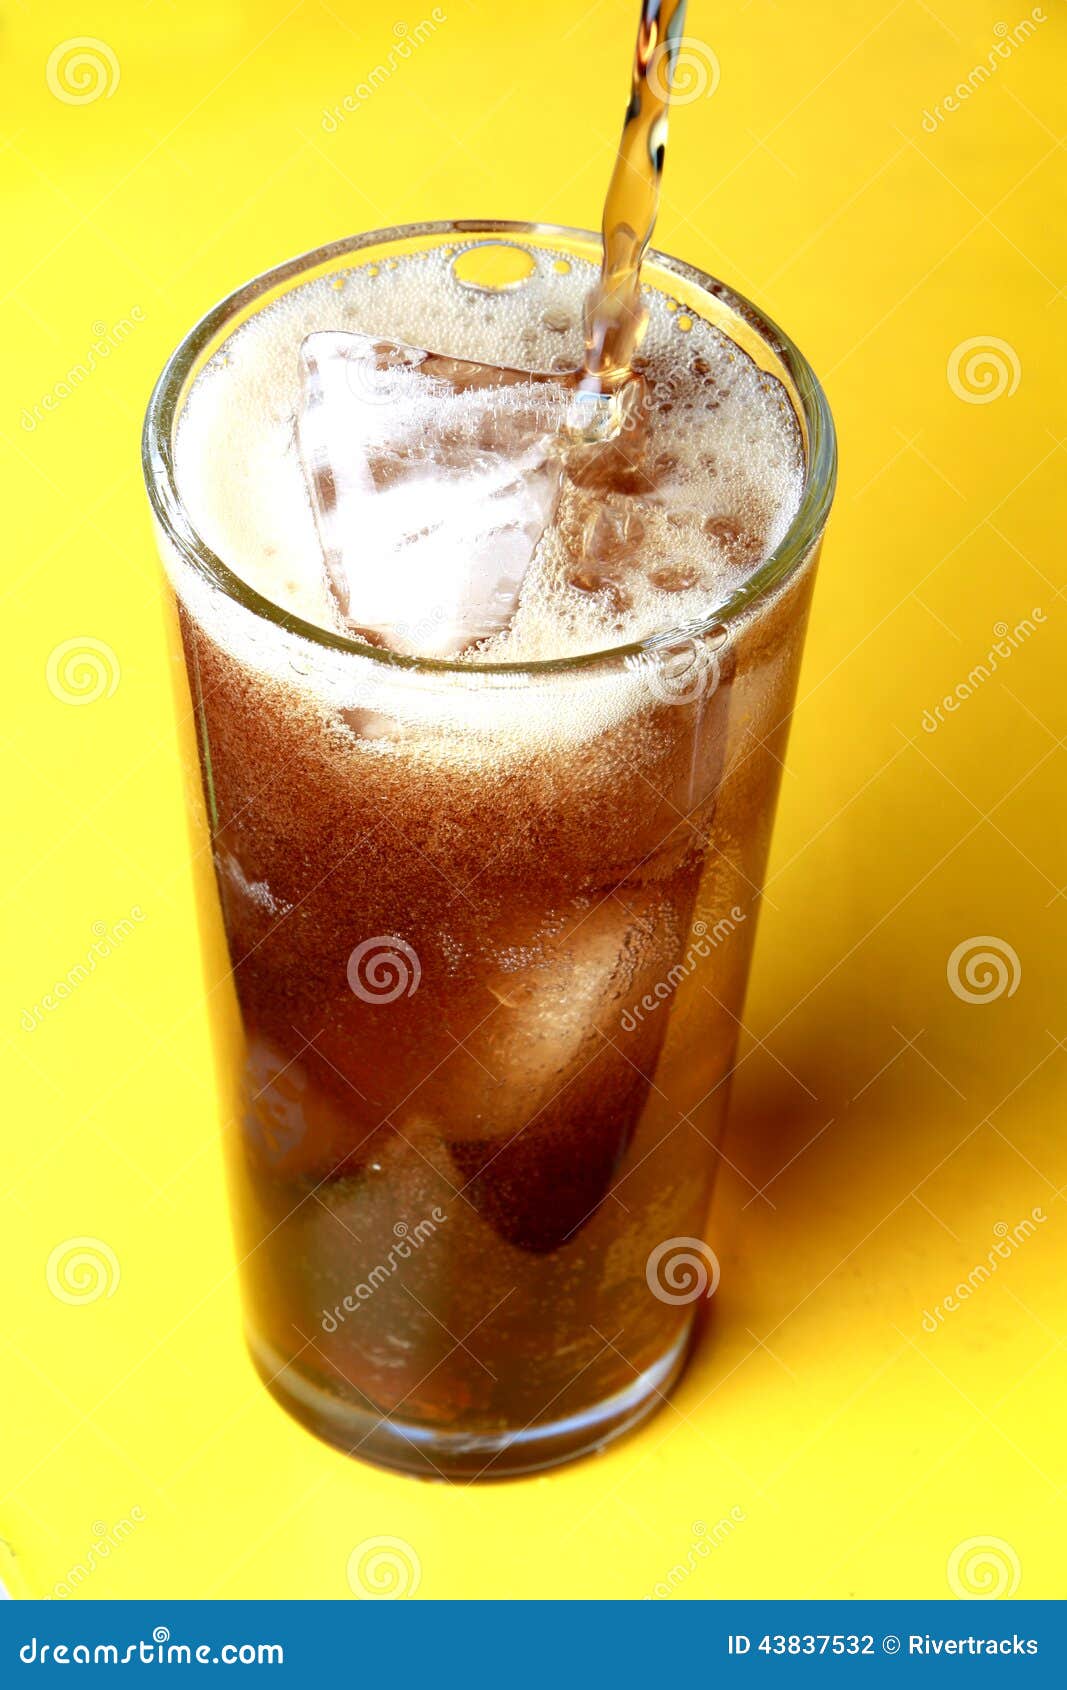 cola soda poured into a glass with ice cubes